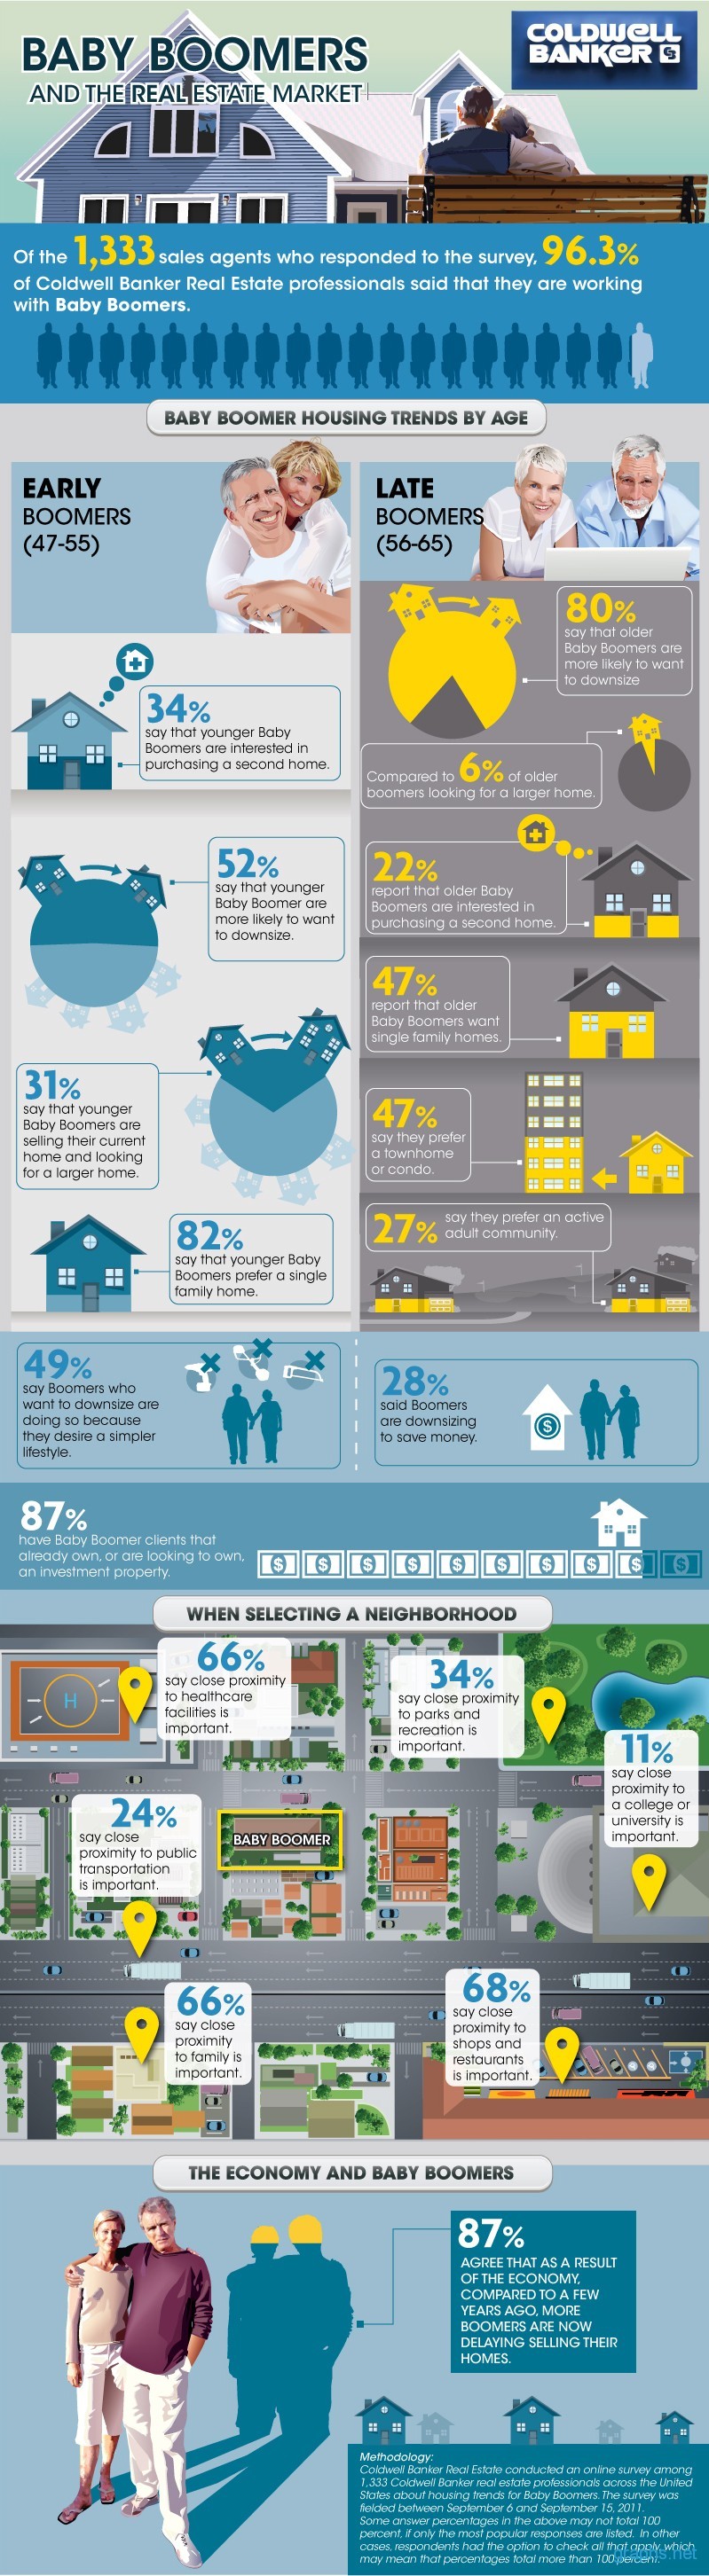 Baby Boomer Housing Trends by Age